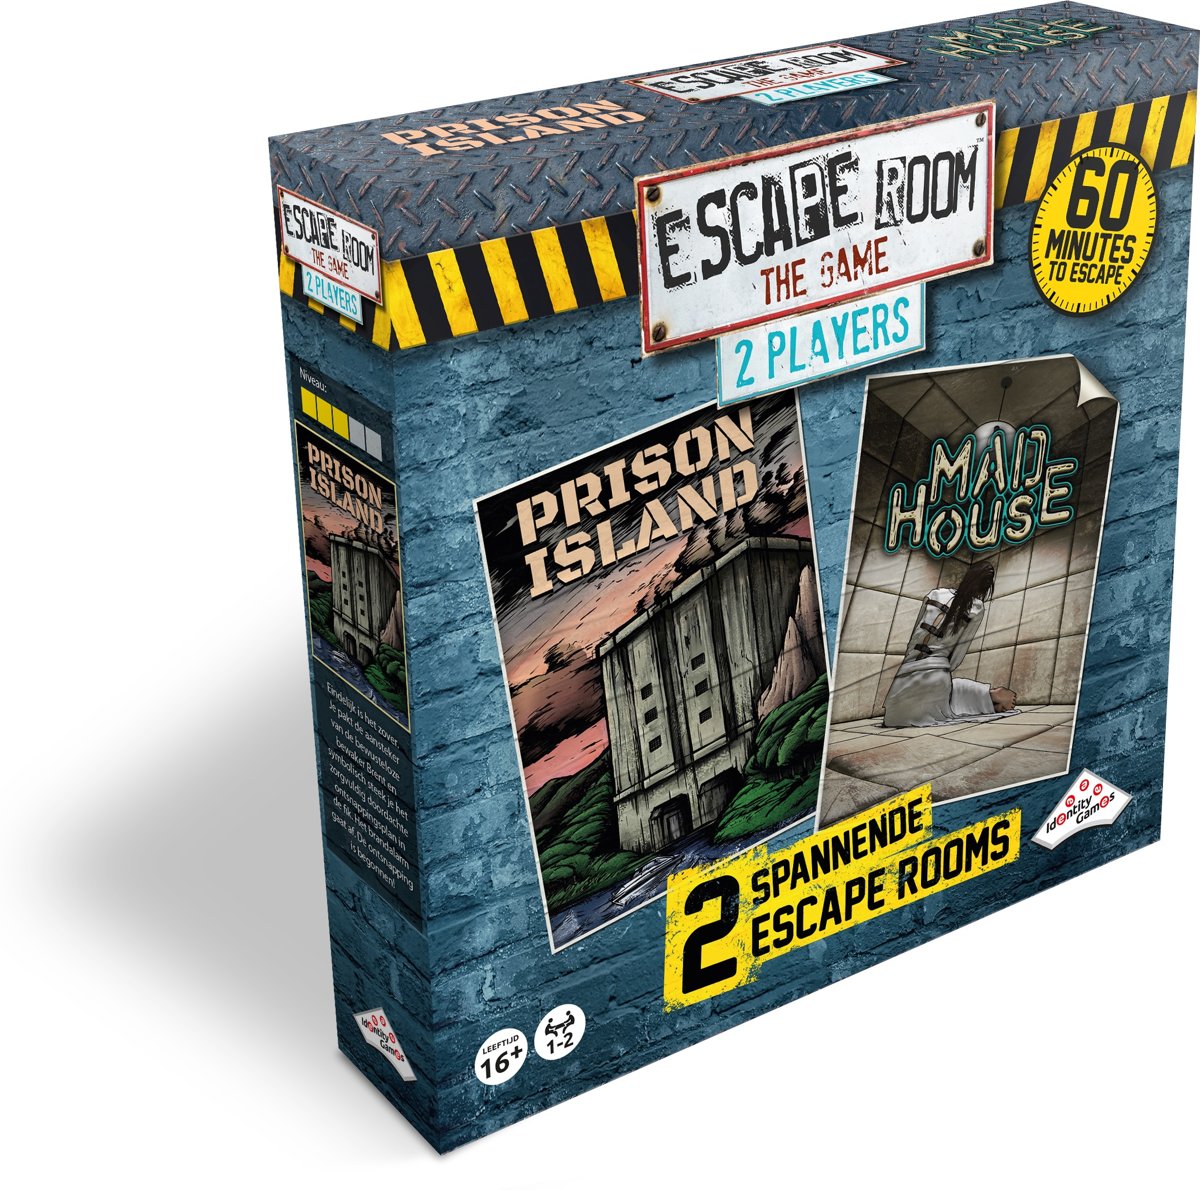 Escape Room The Game: 2 Player